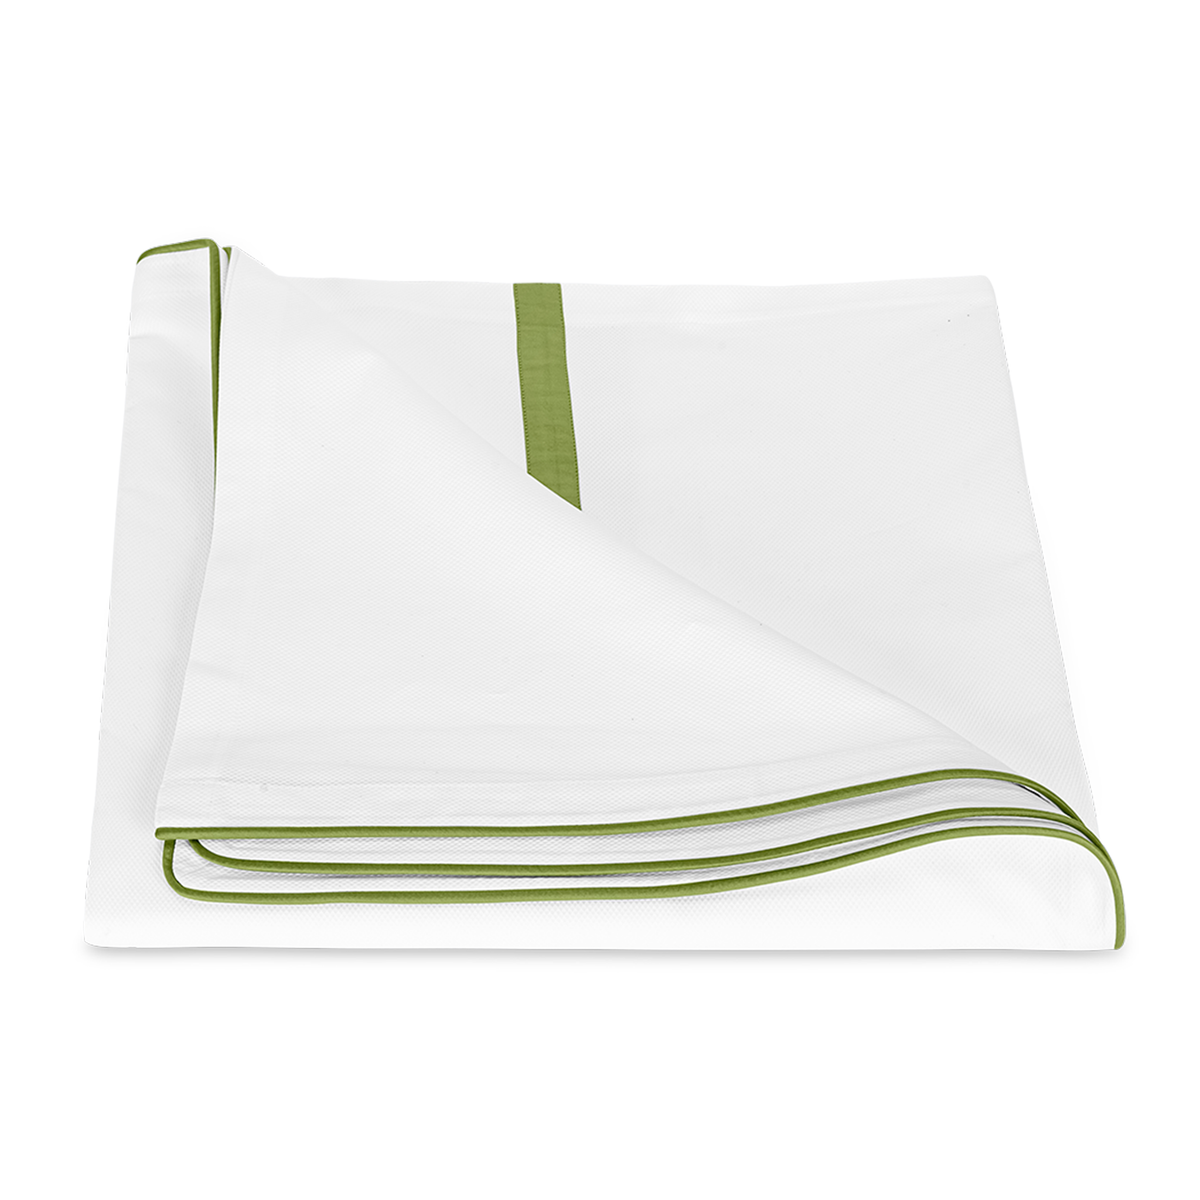 Folded Duvet Cover of Matouk Louise Pique Bedding in Color Grass